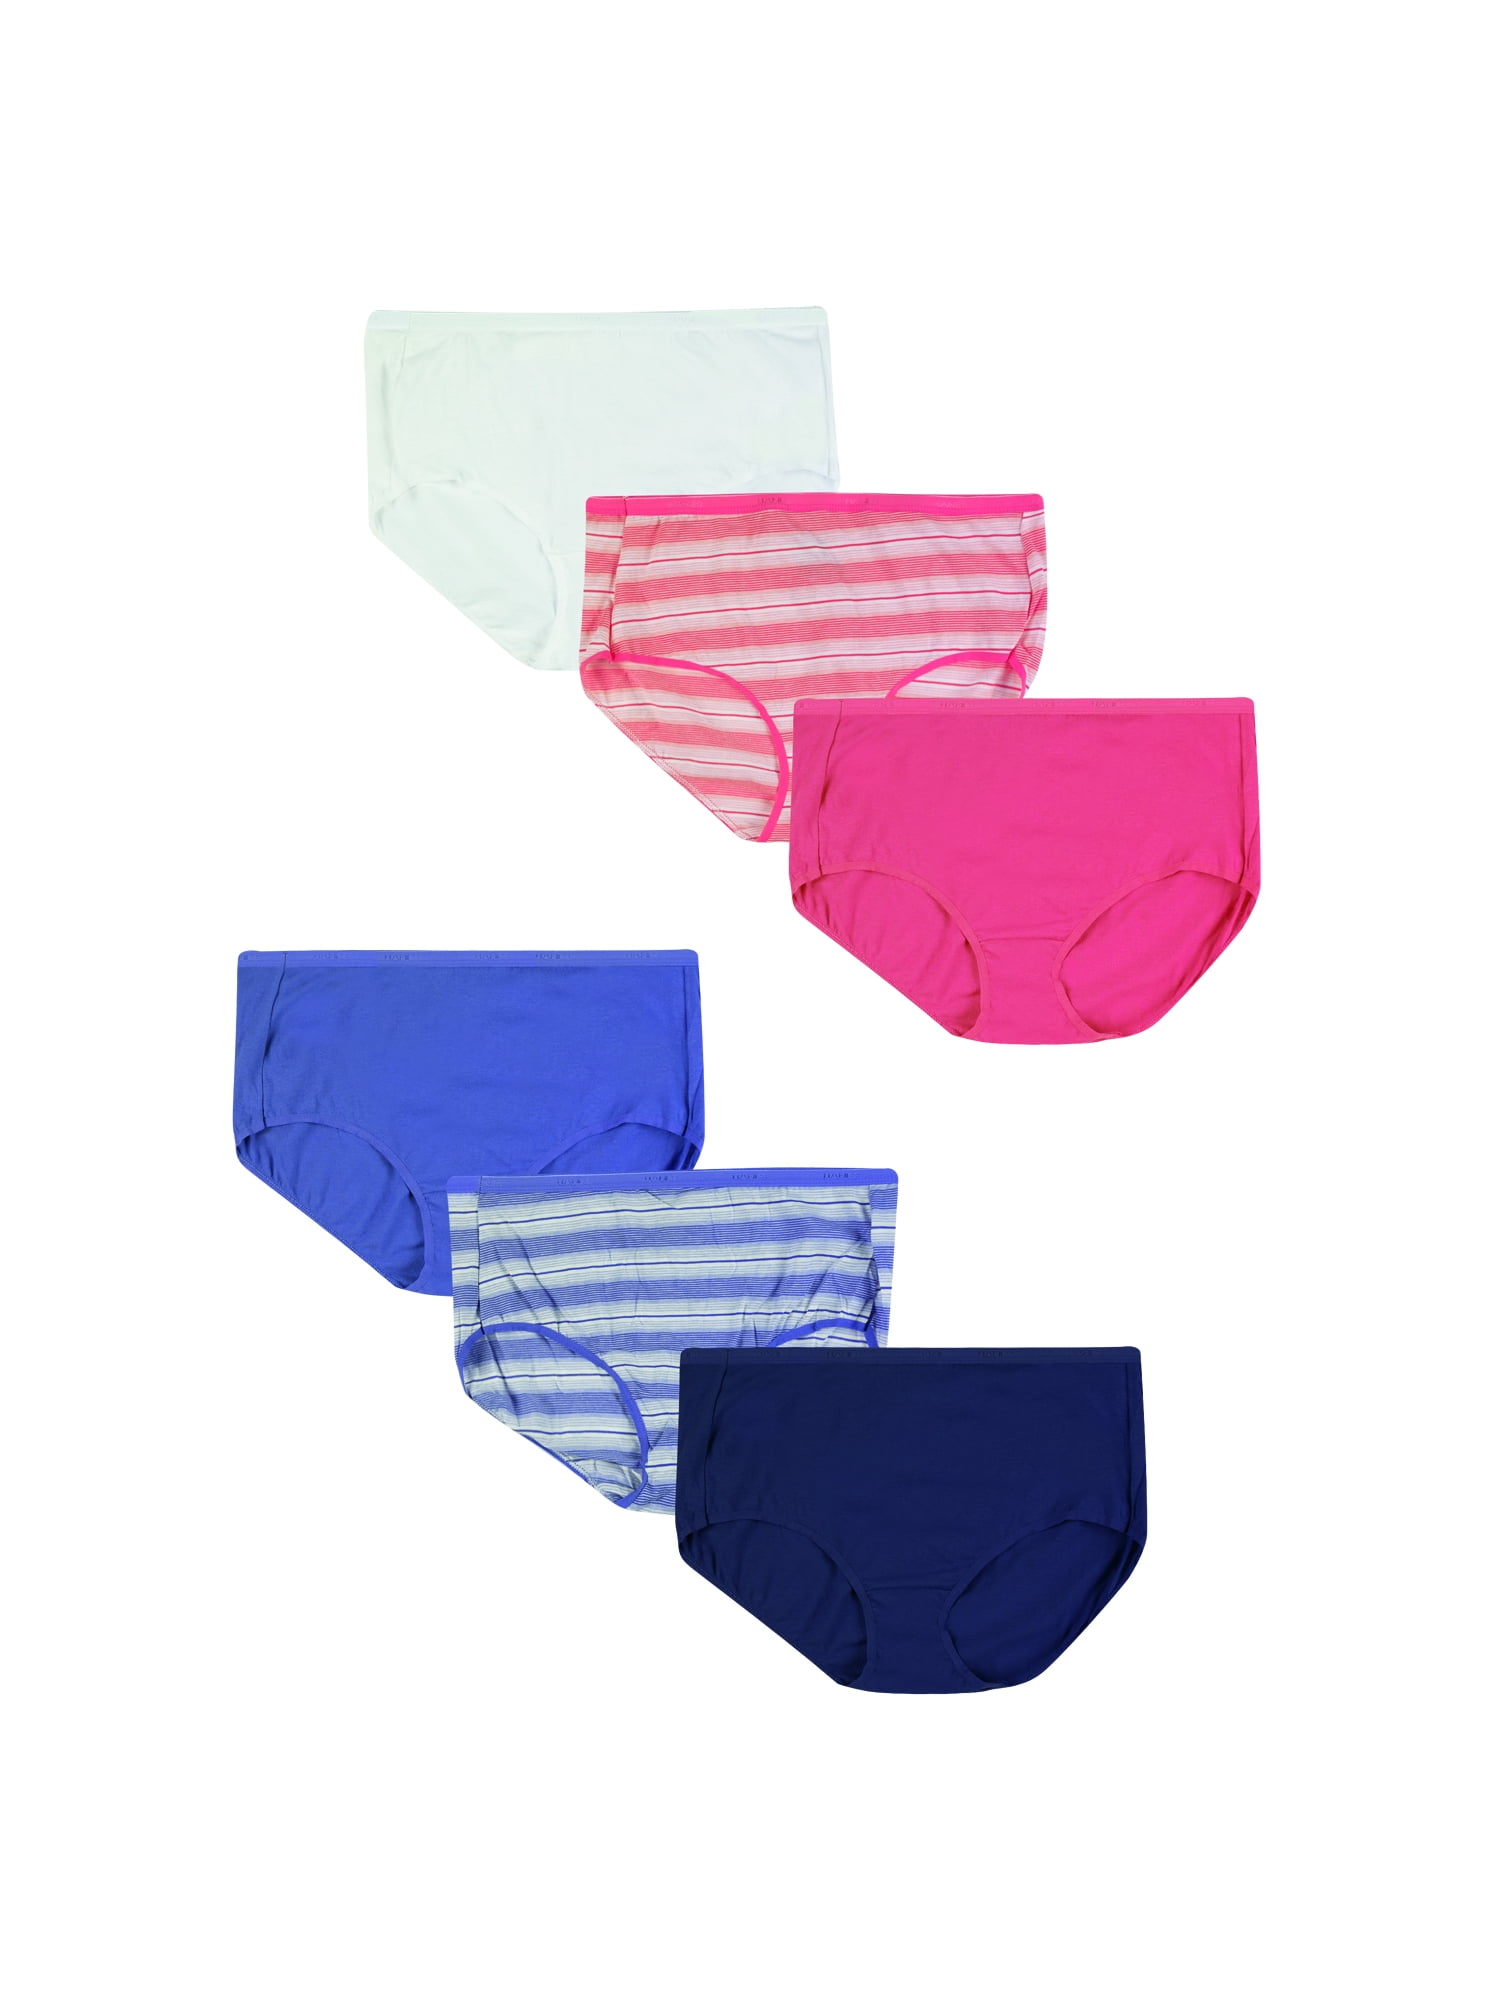 Signature Choices Bahamas - Plus size panties from Hanes. Up to womens size  14. #signaturechoices #panties #briefs #plussize